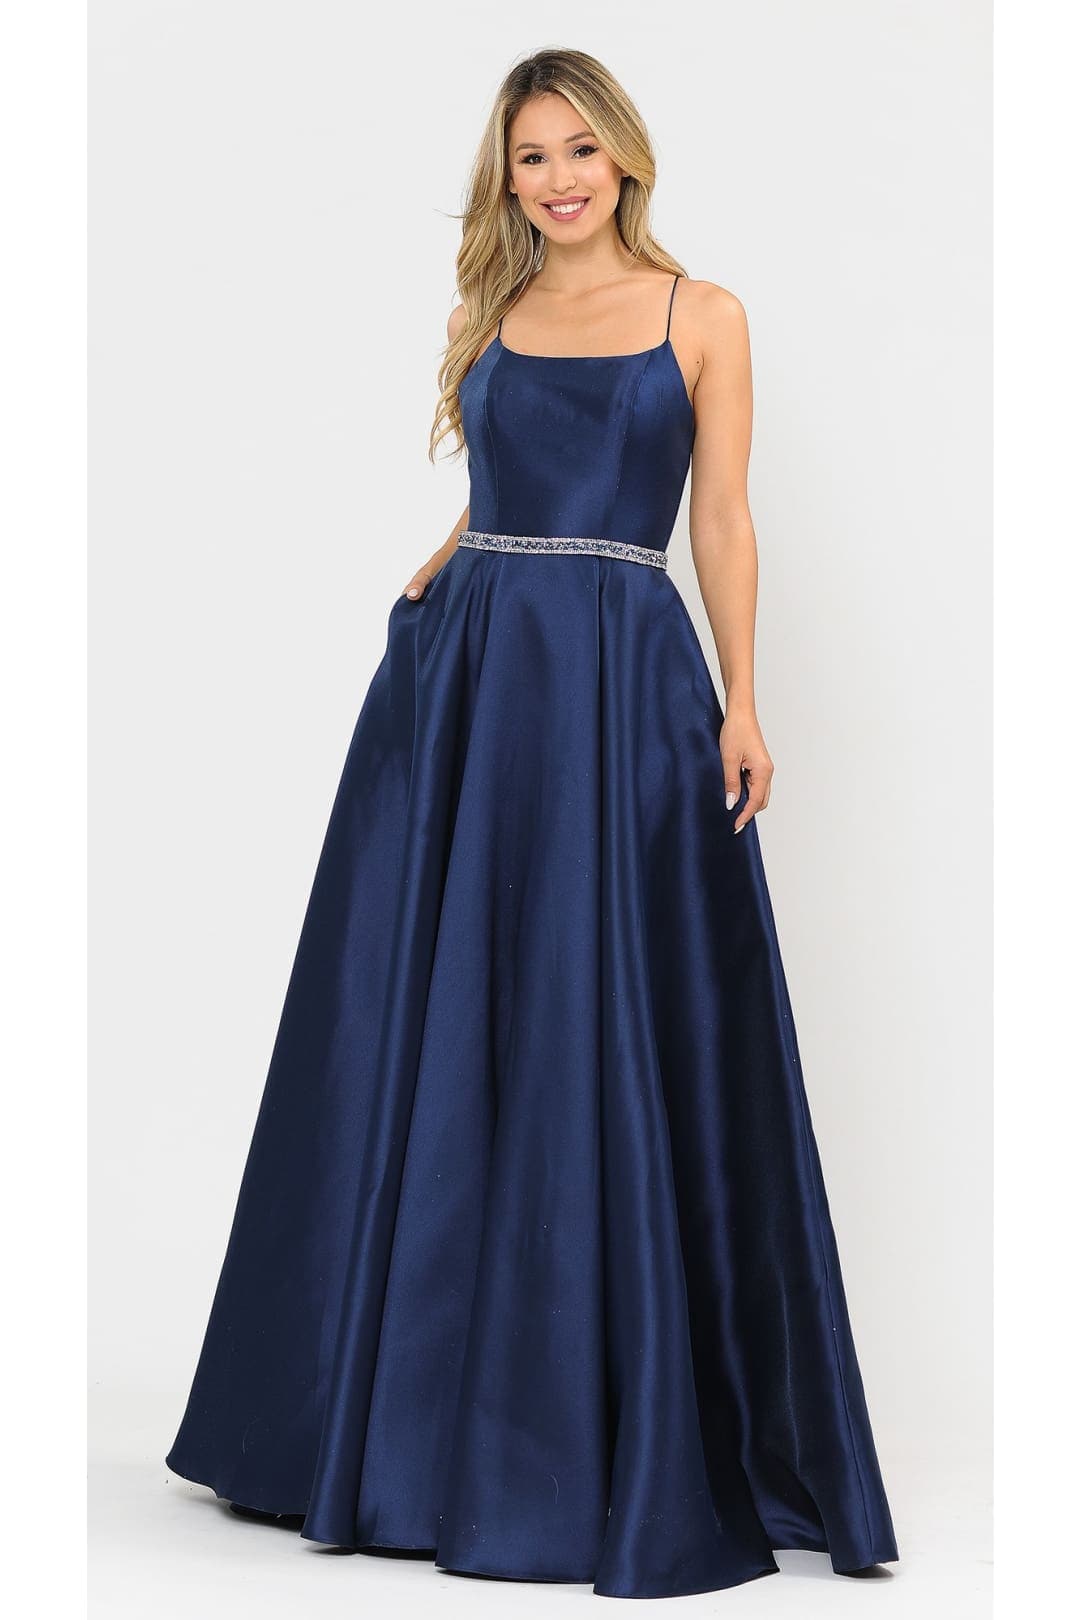 Special Occasion A-Line Formal Prom Dress - NAVY / XS